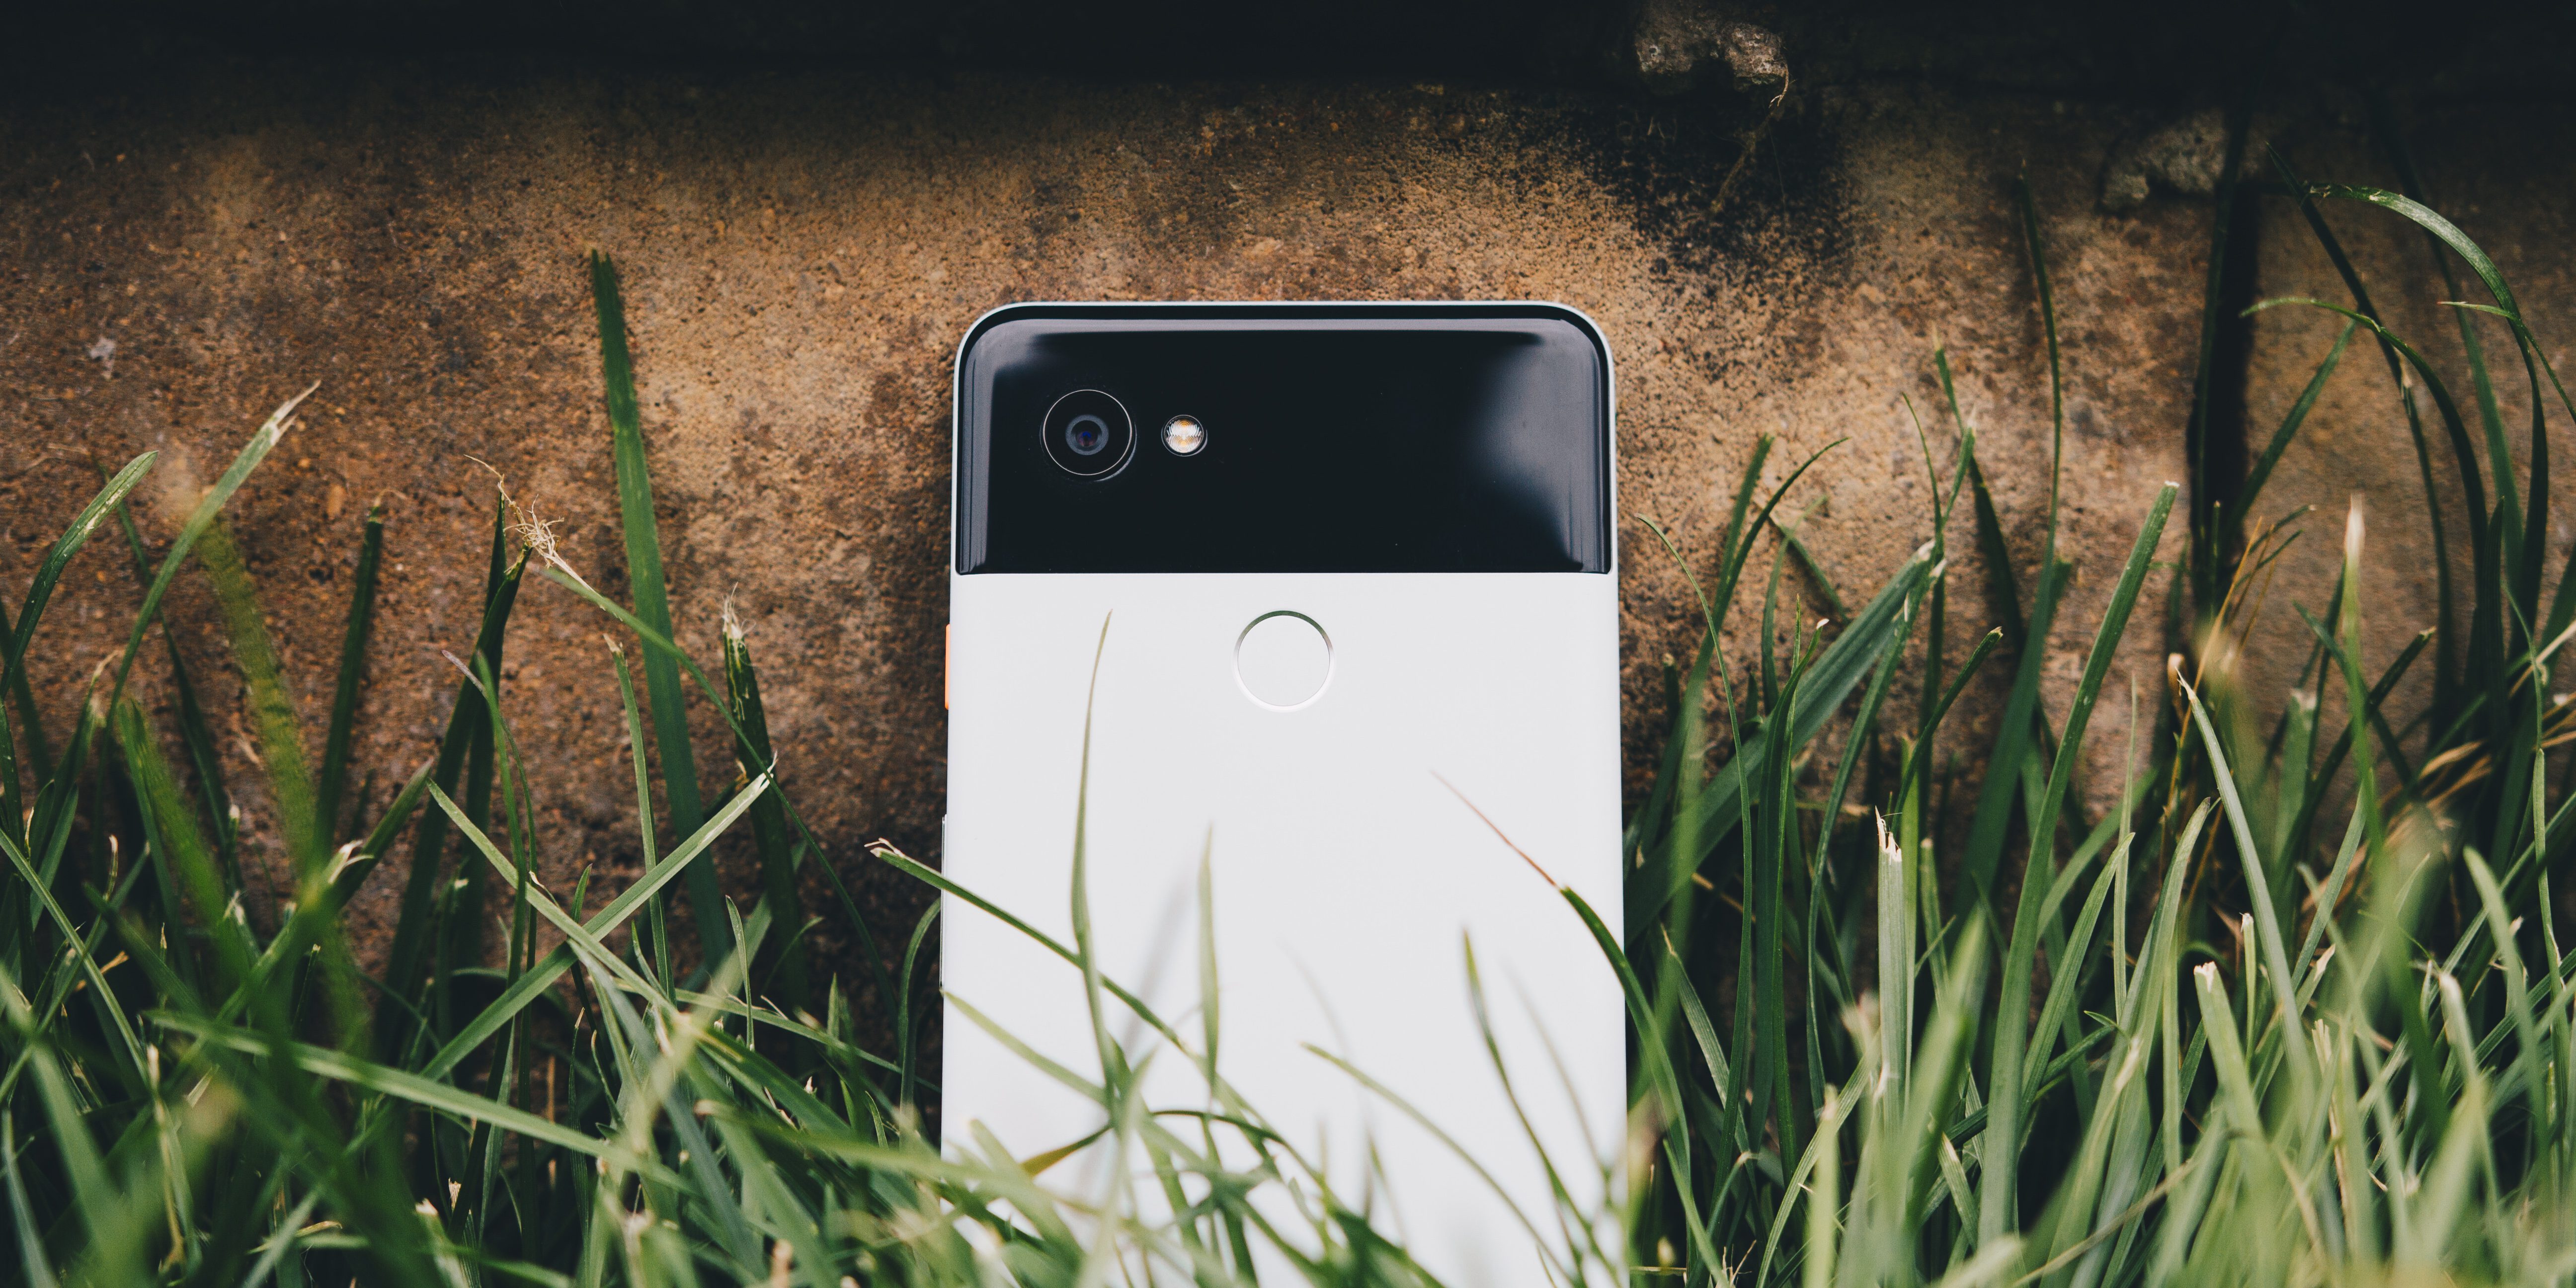 Pixel 2 unlimited Google Photos storage ends this month - 9to5Google